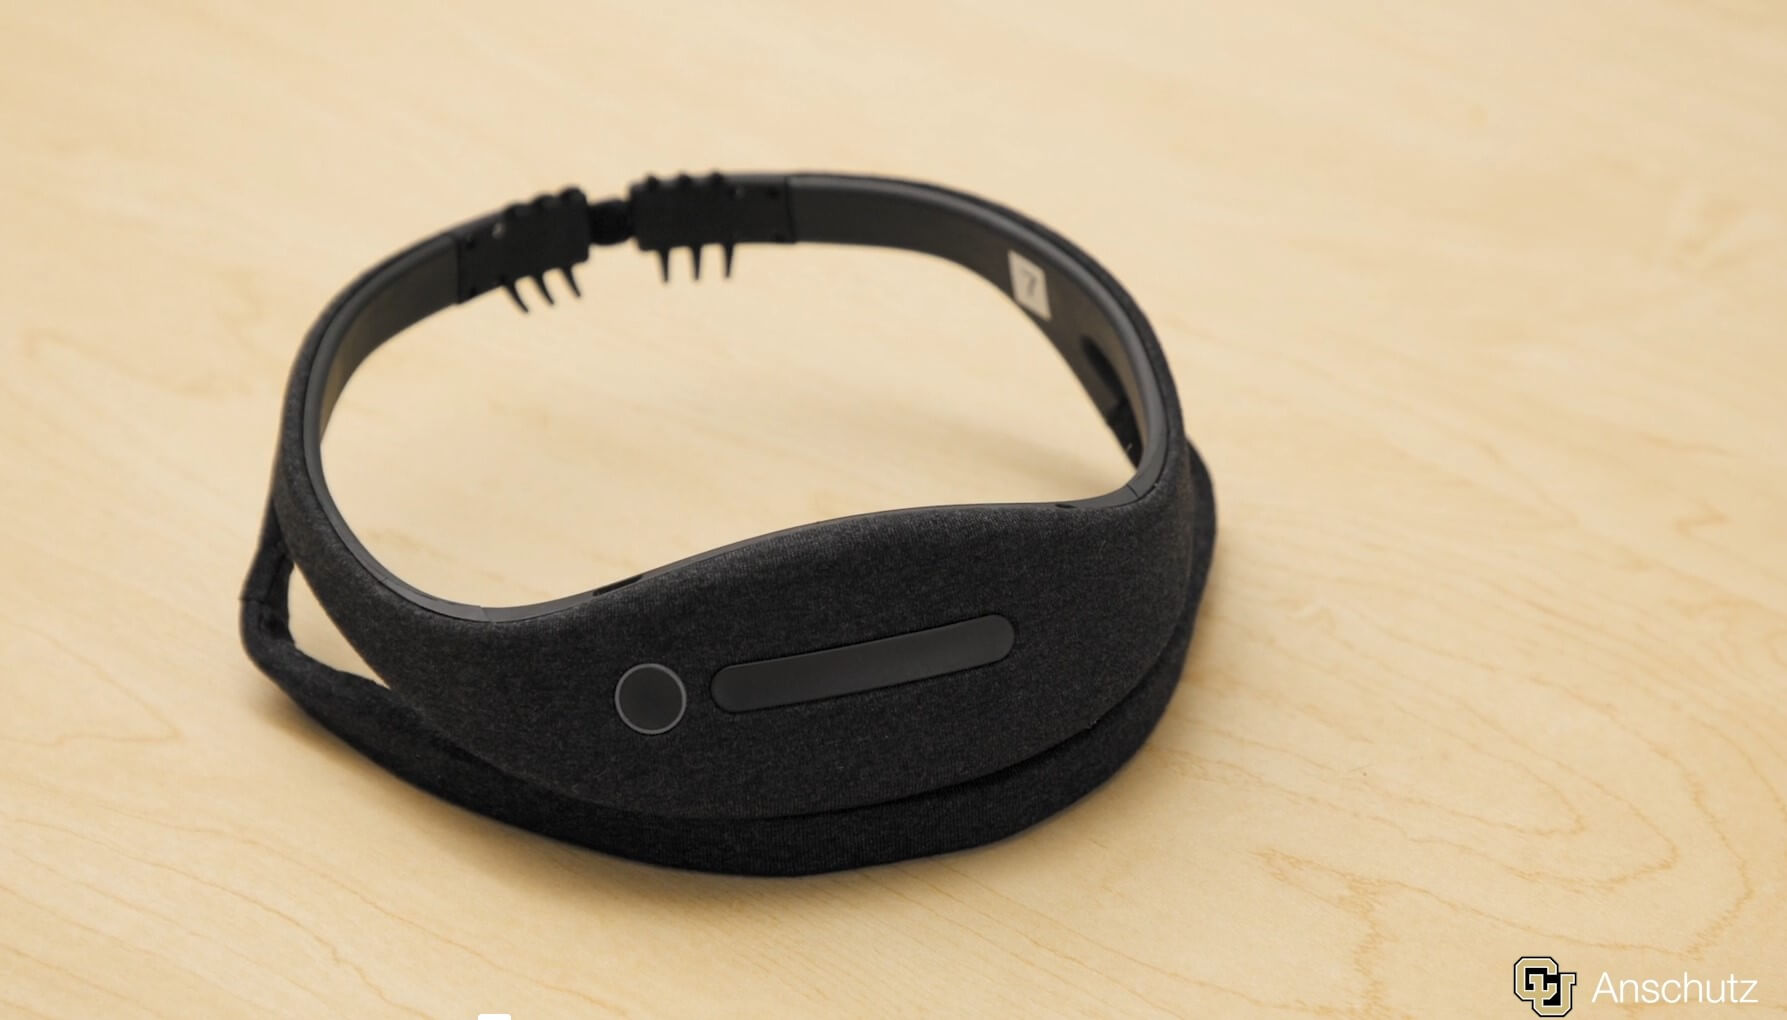 A Fitness Tracker for Brain Health